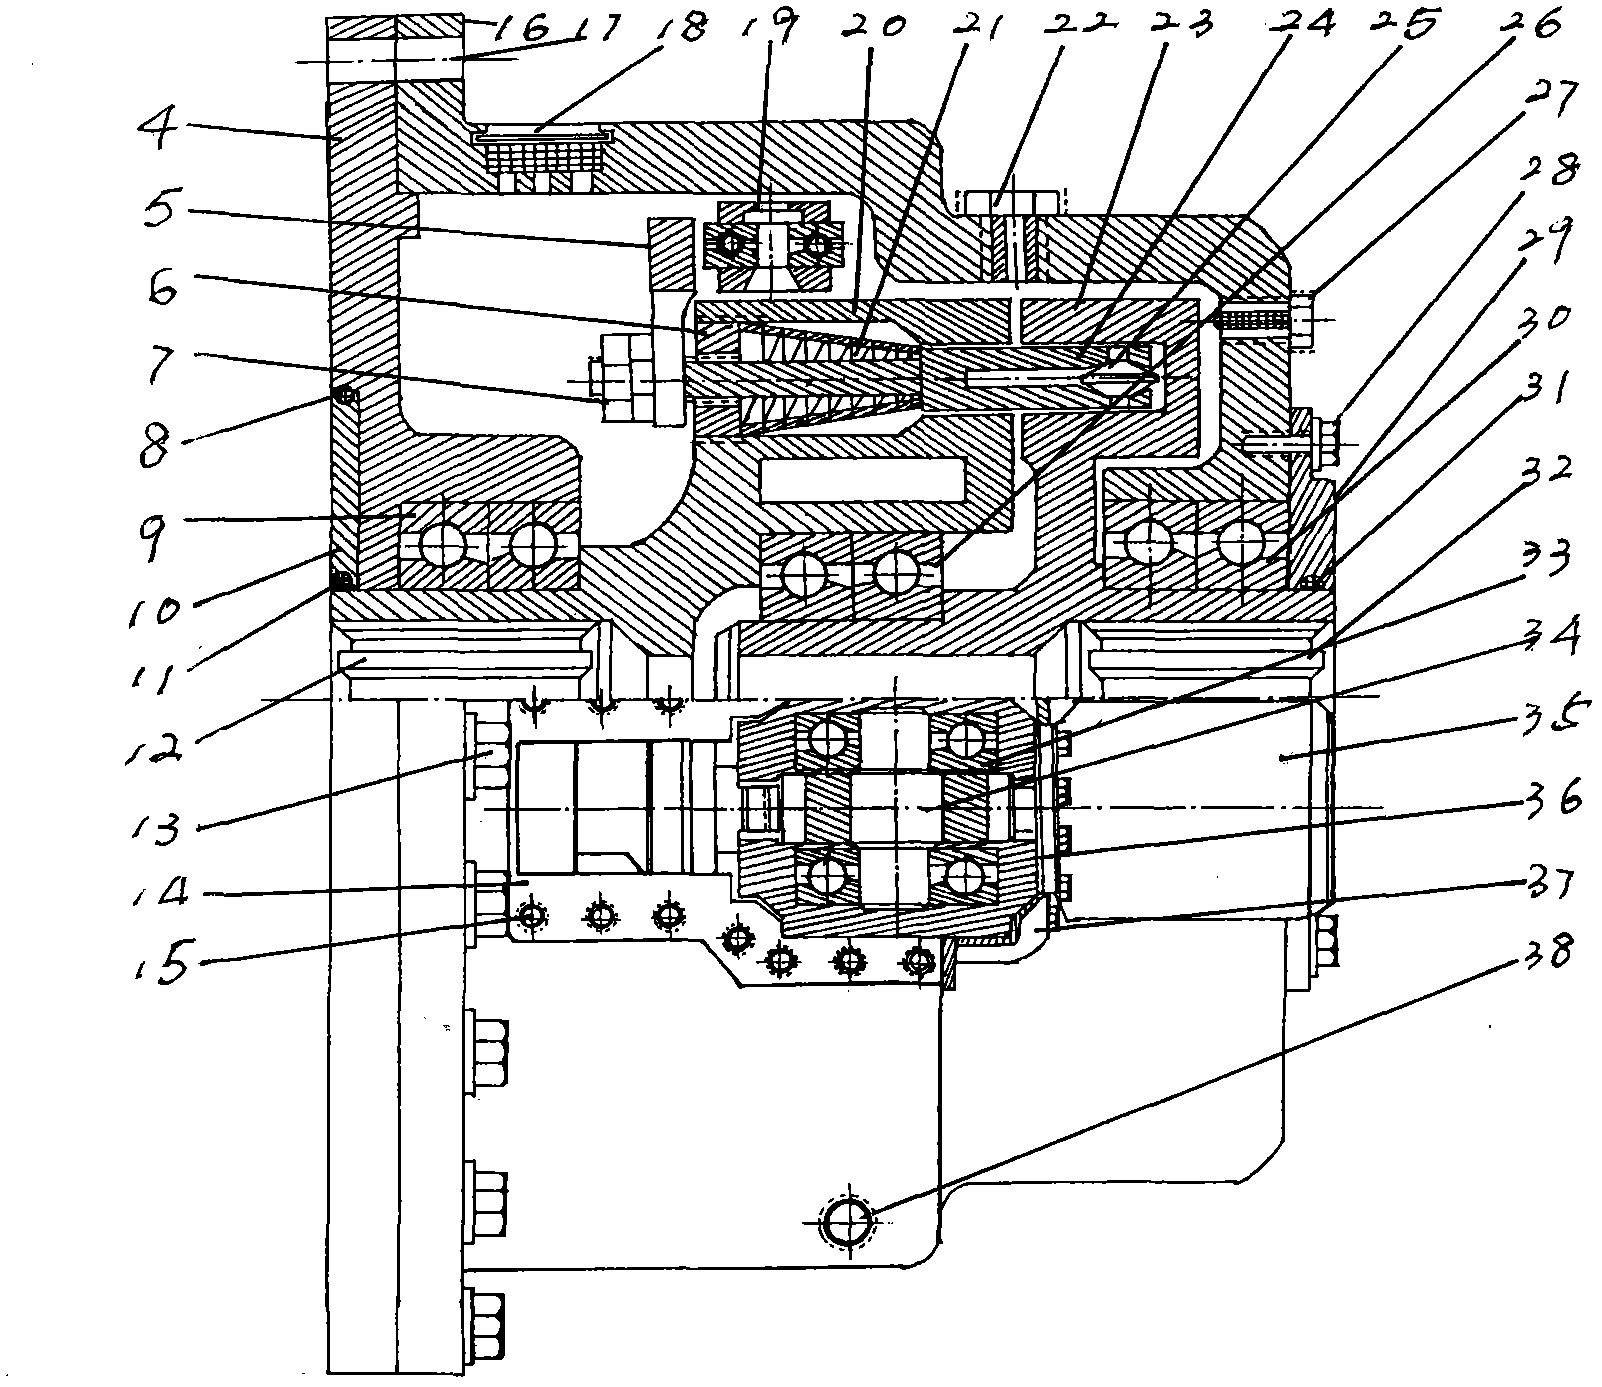 Inserter-connected electromagnetic drive clutch with spline shafts having discs and spline sleeves having discs